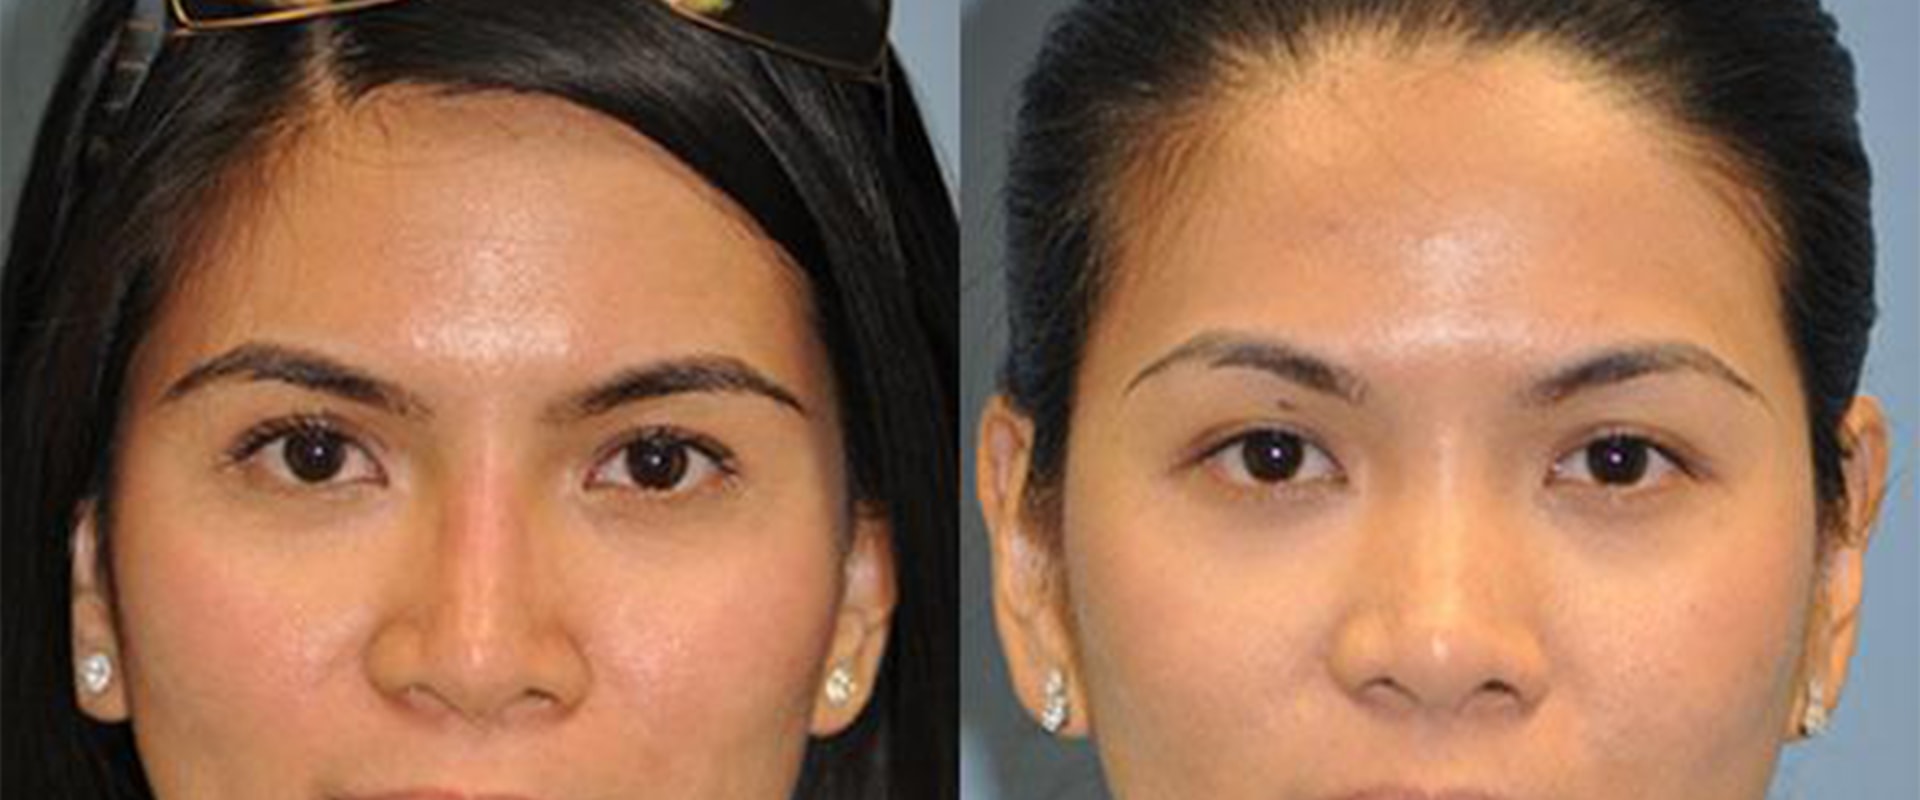 The Game-Changing Benefits of Silikon-1000 for Permanent Nose Sculpting